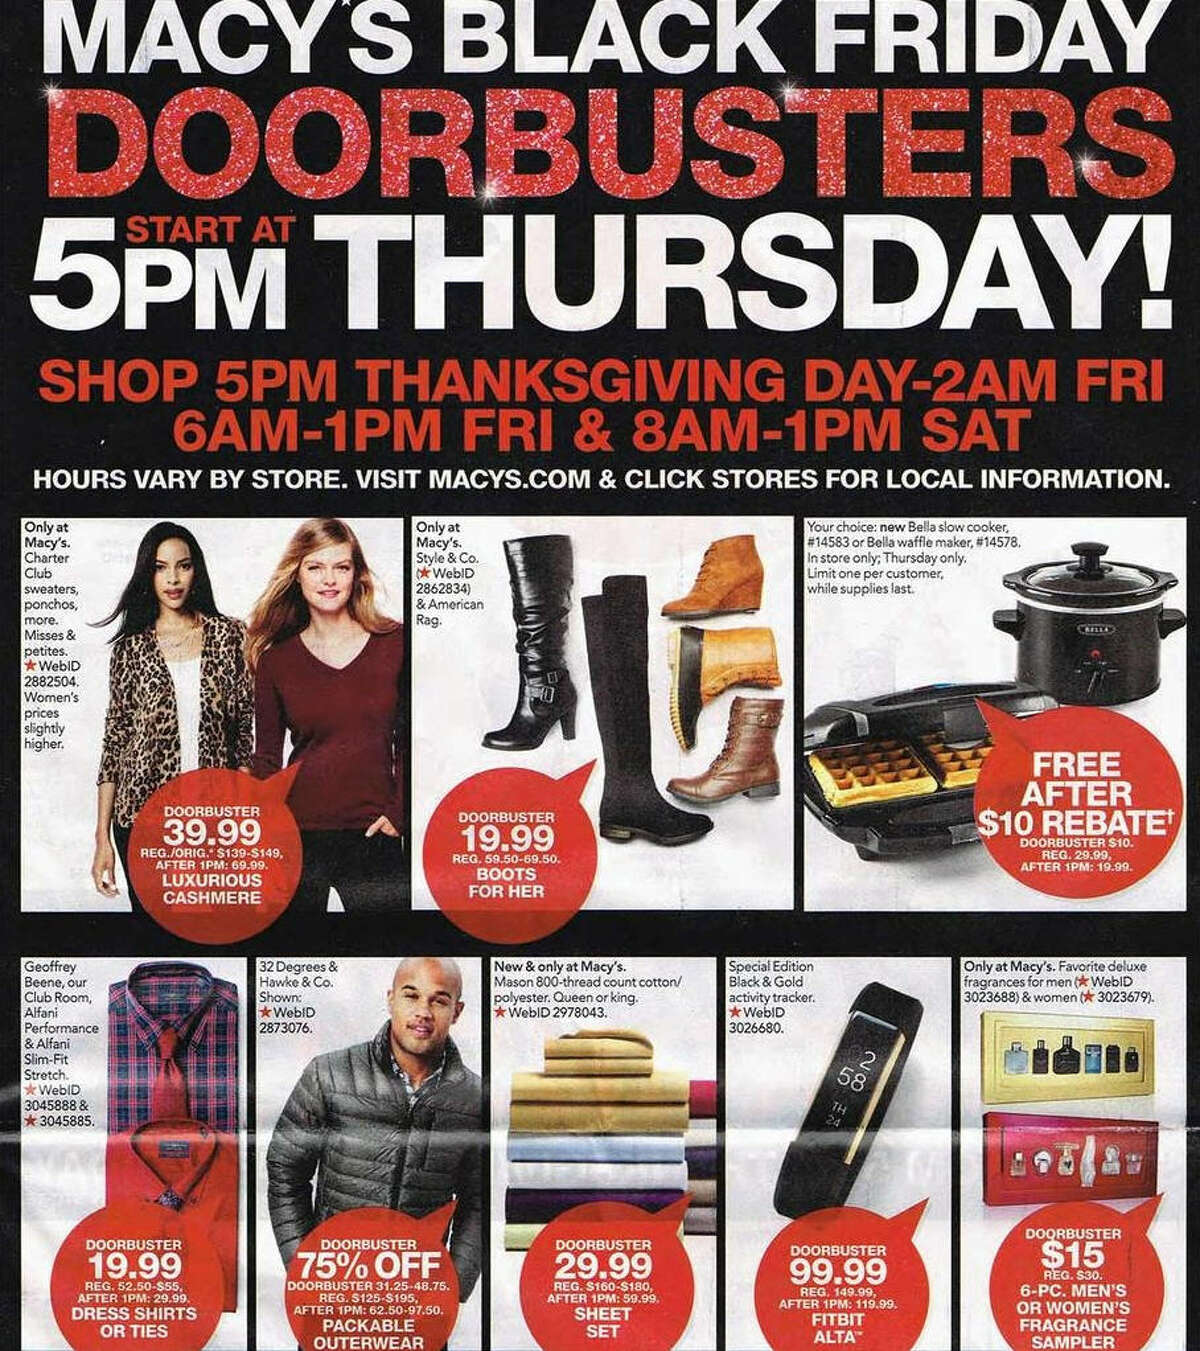 Macy's 2016 Black Friday ad circular leaked ahead of release